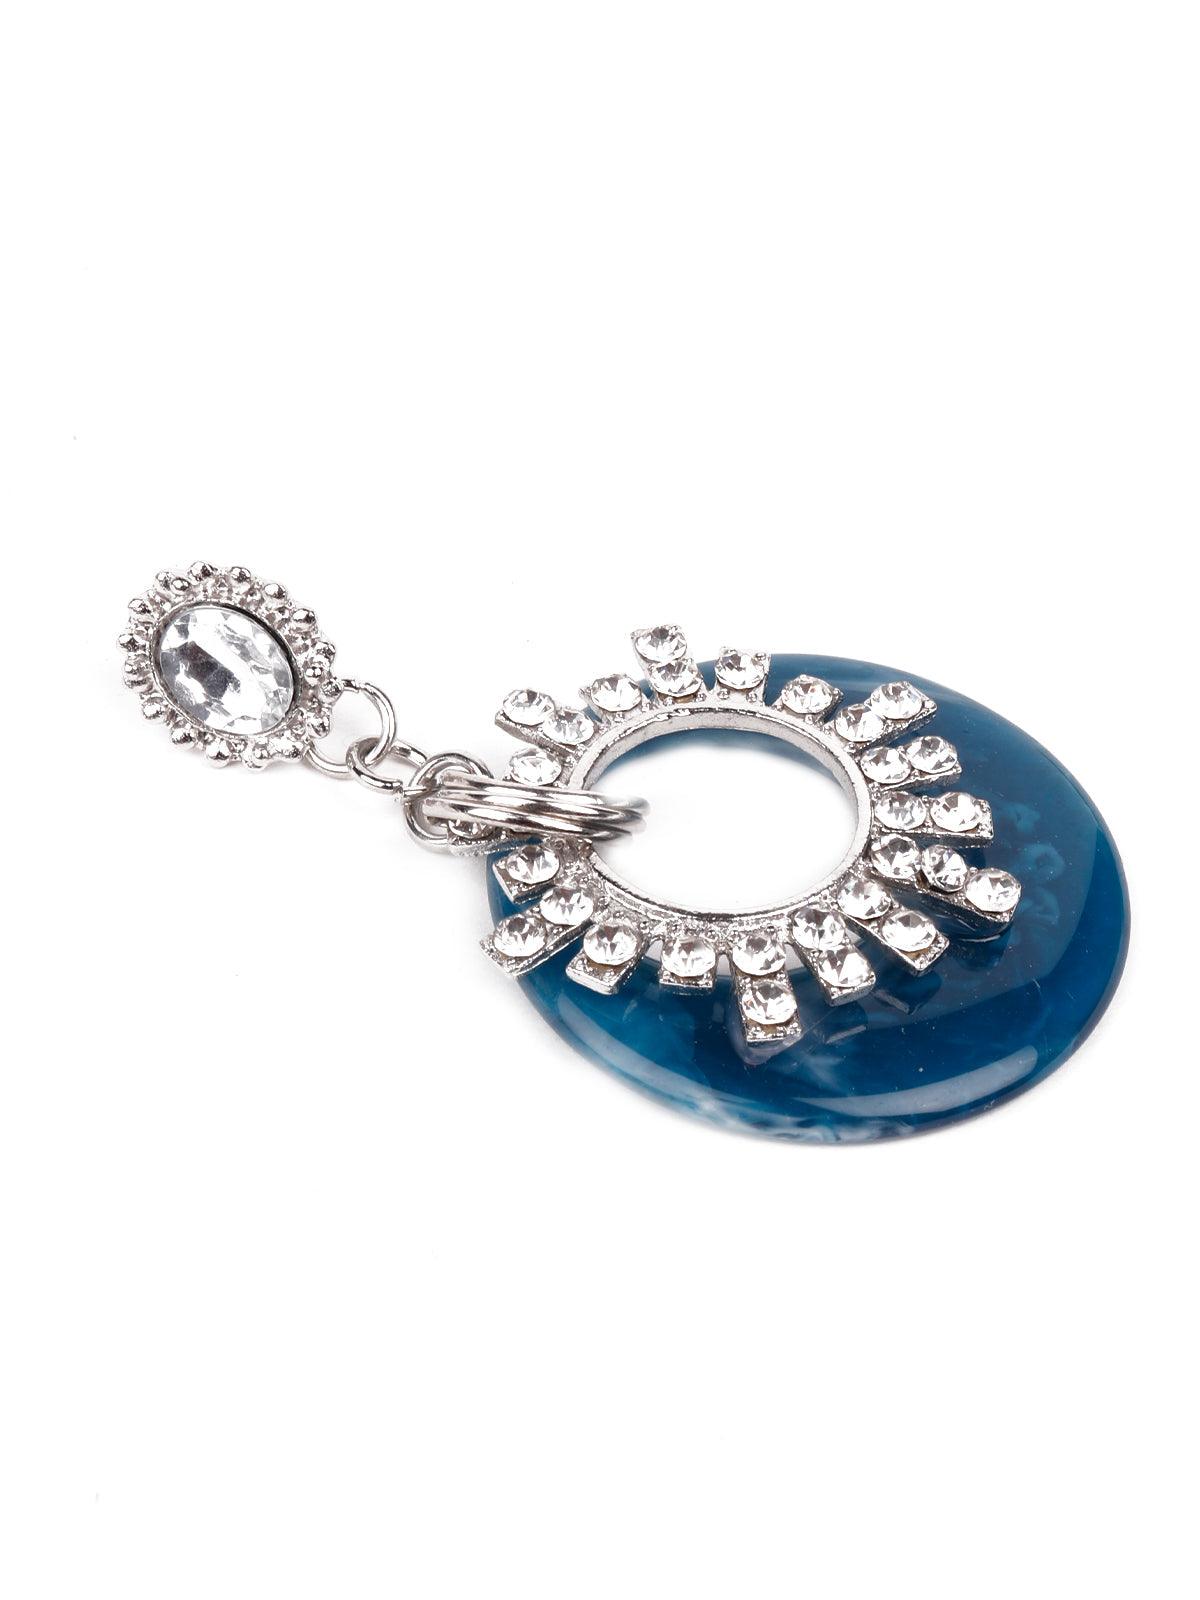 Women's Gorgeous Blue Rounded Studded Drop Earrings - Odette